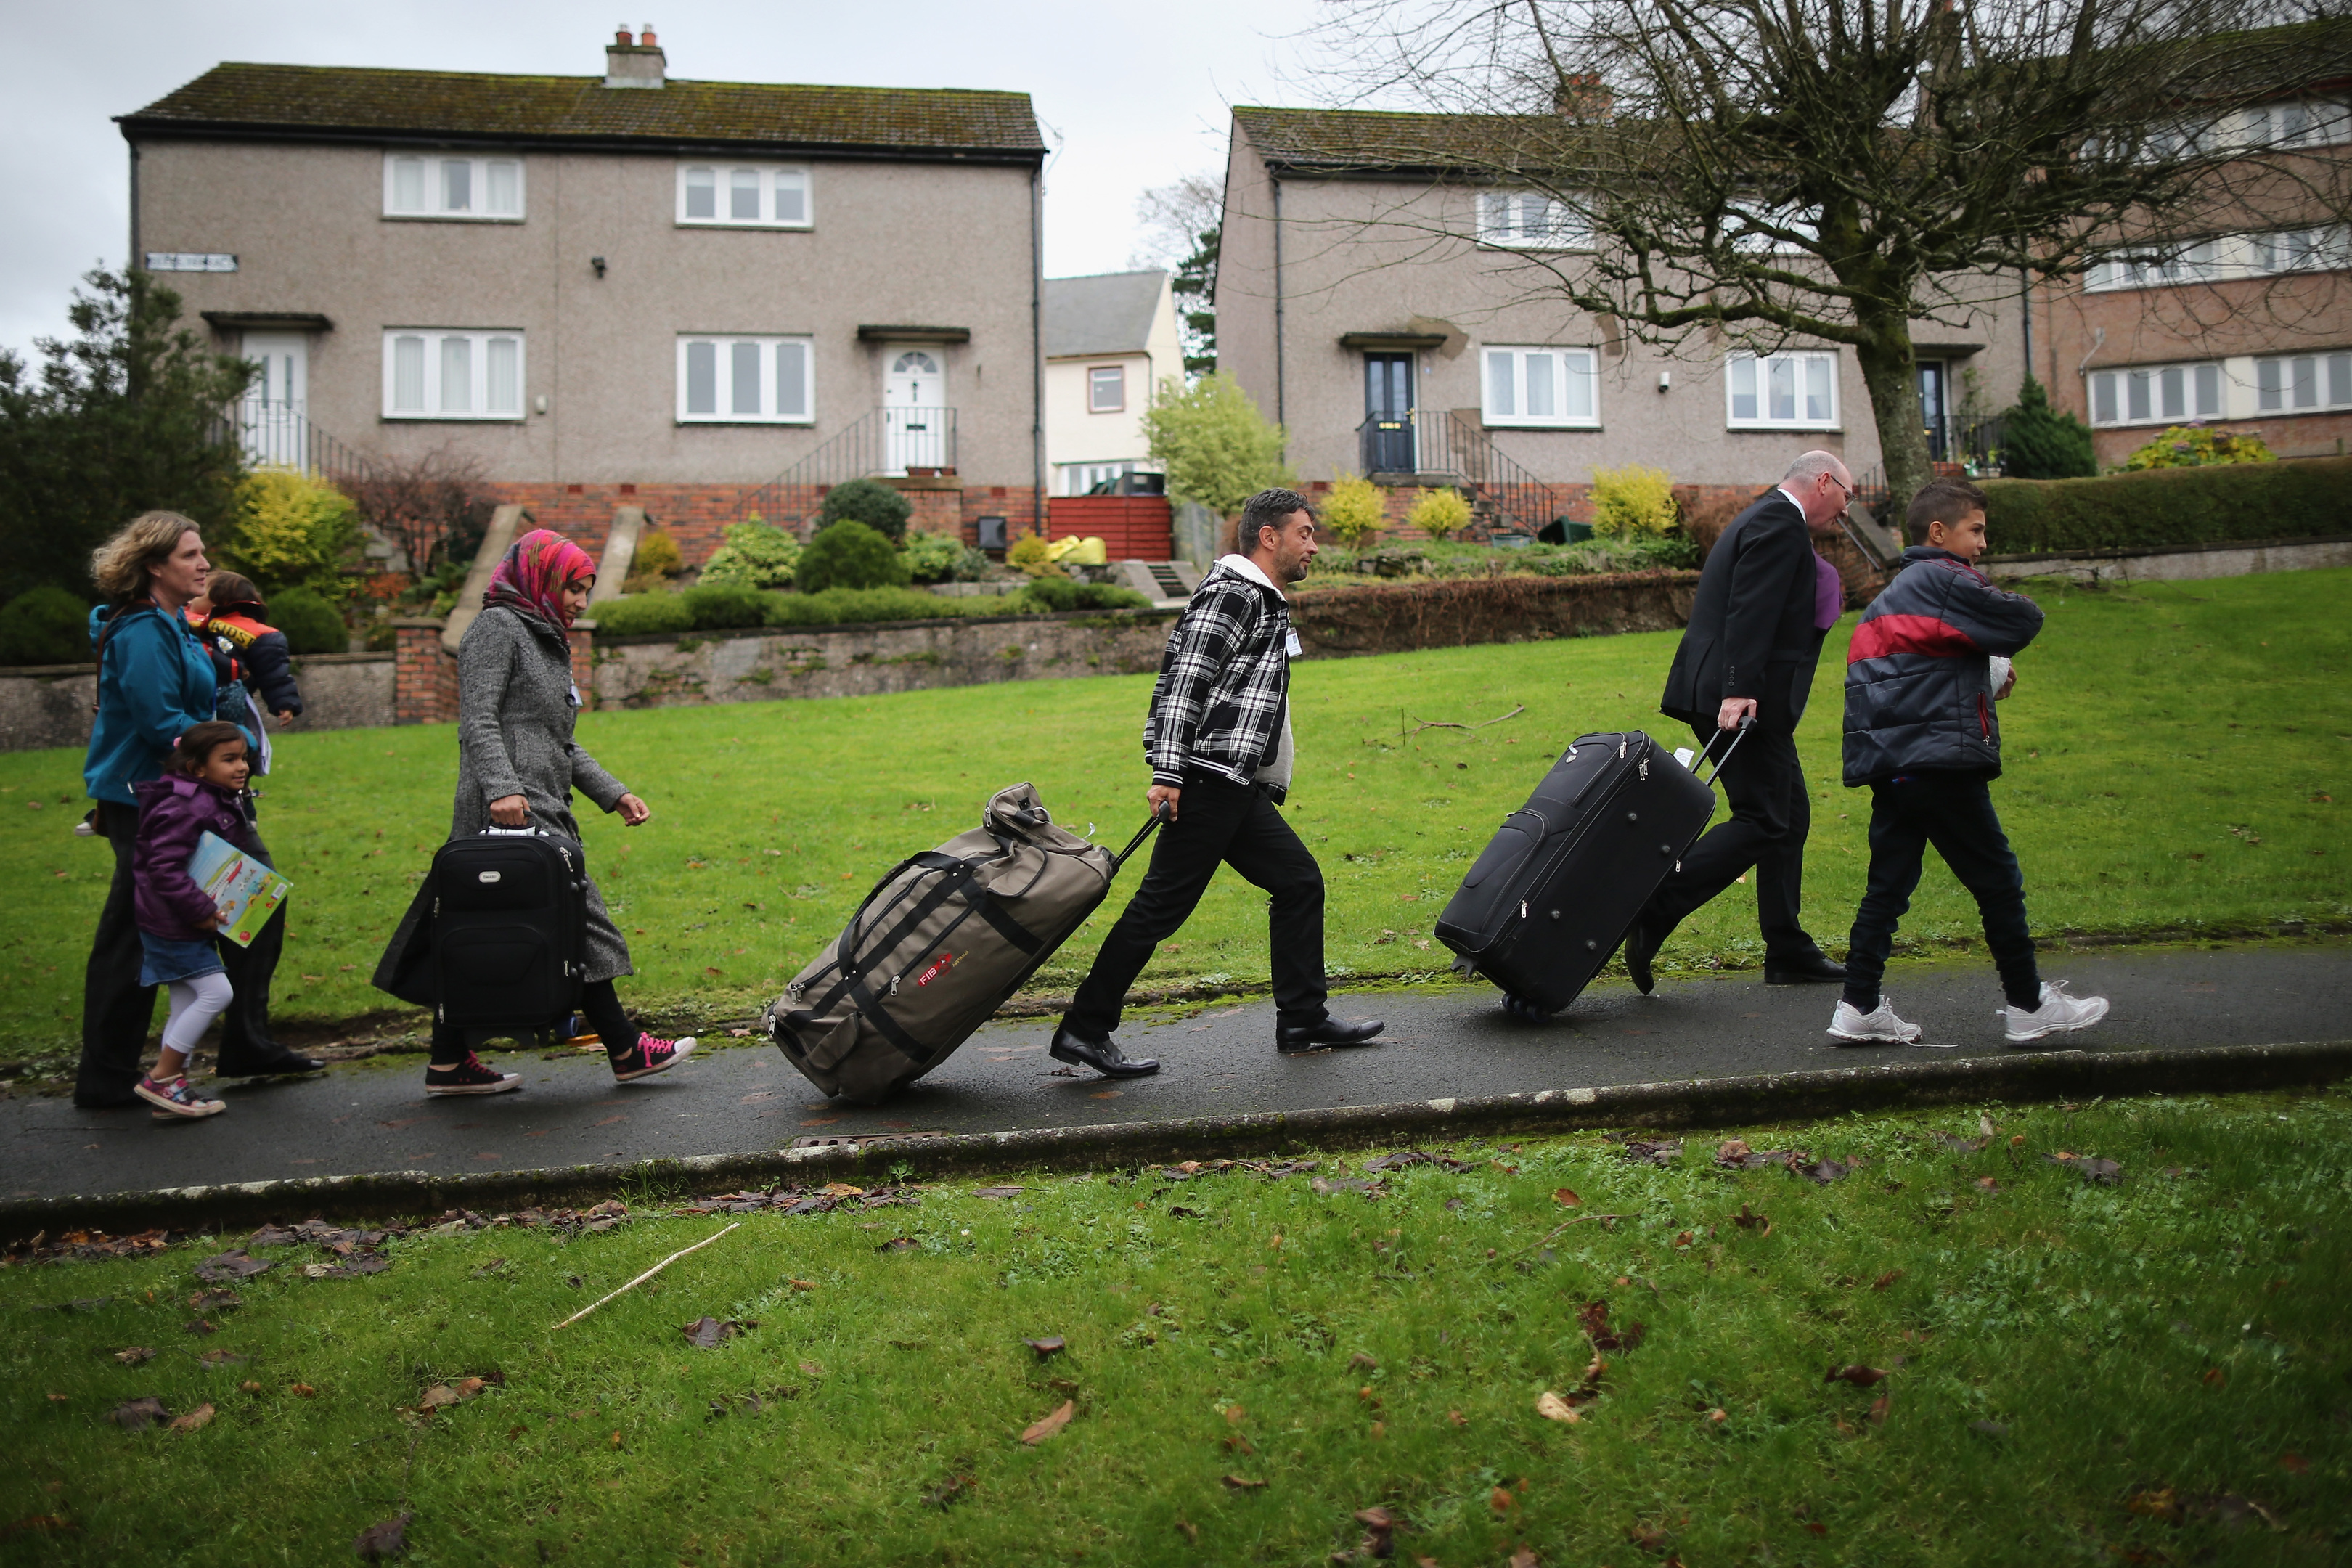 Syrian refugee families arrive at their new homes on the Isle of Bute.